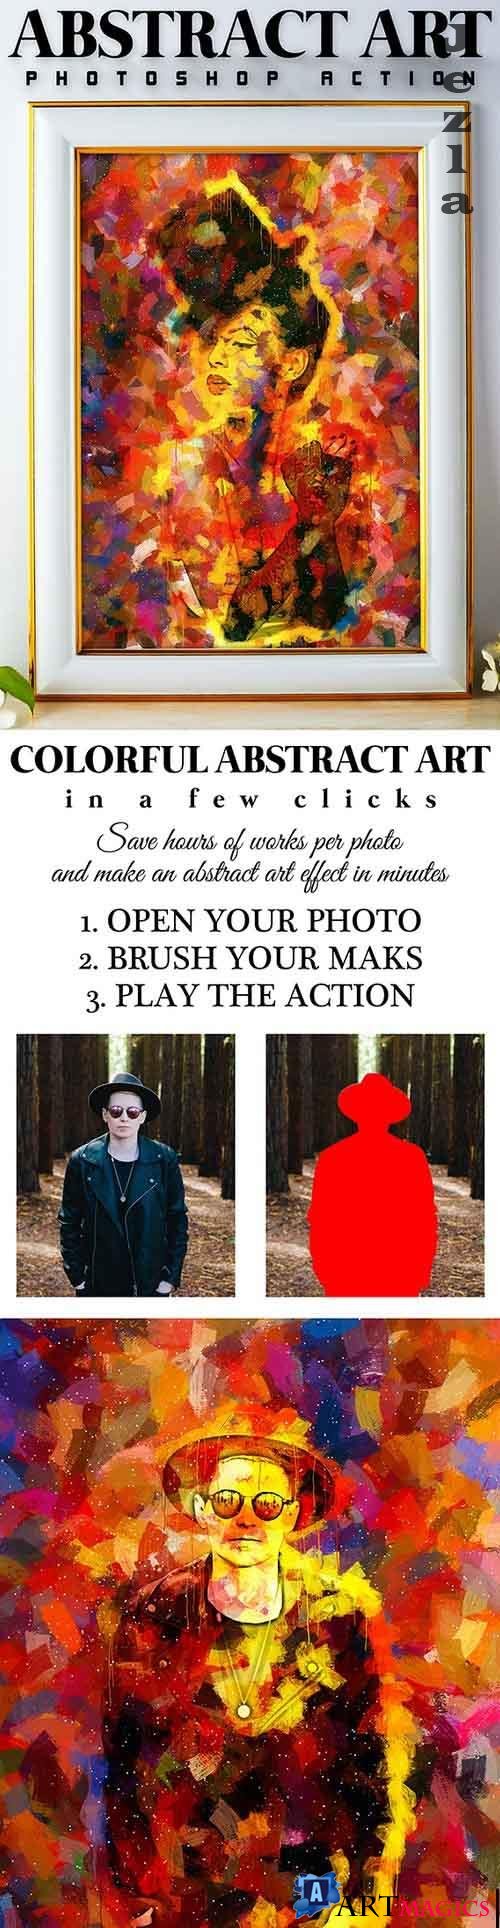 Abstract Art Photoshop Action 26121789